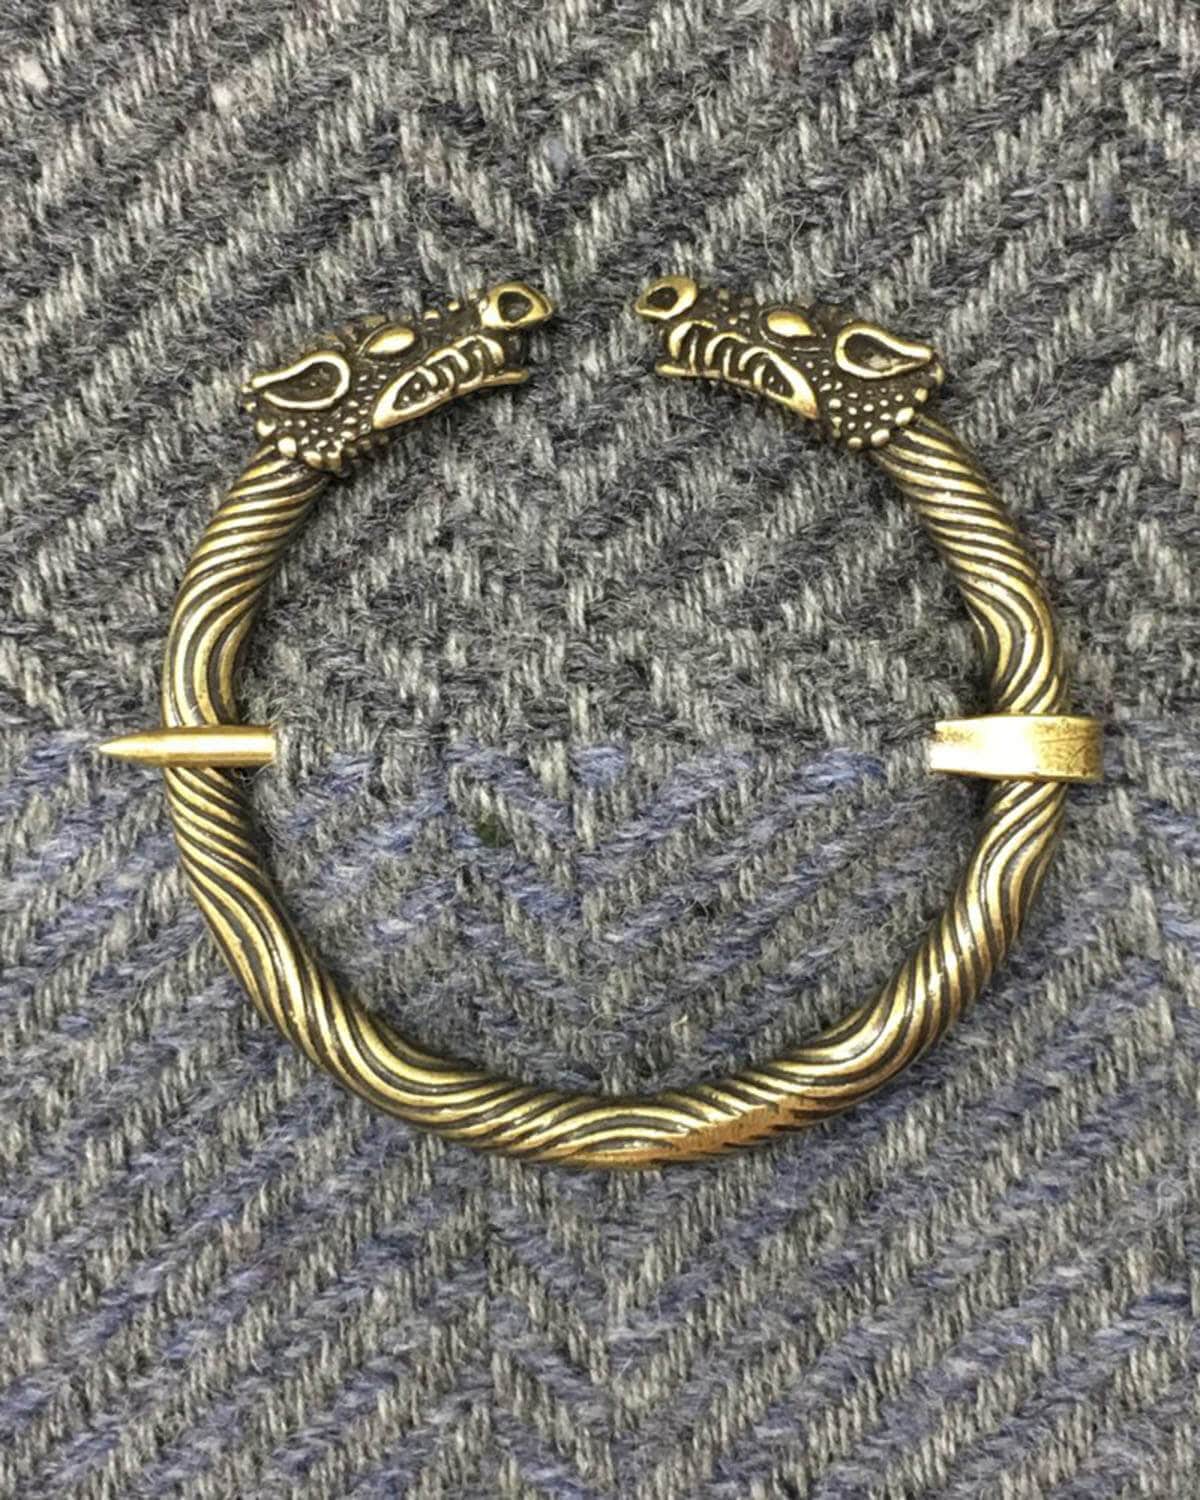 A bracelet with two dragon heads on it.